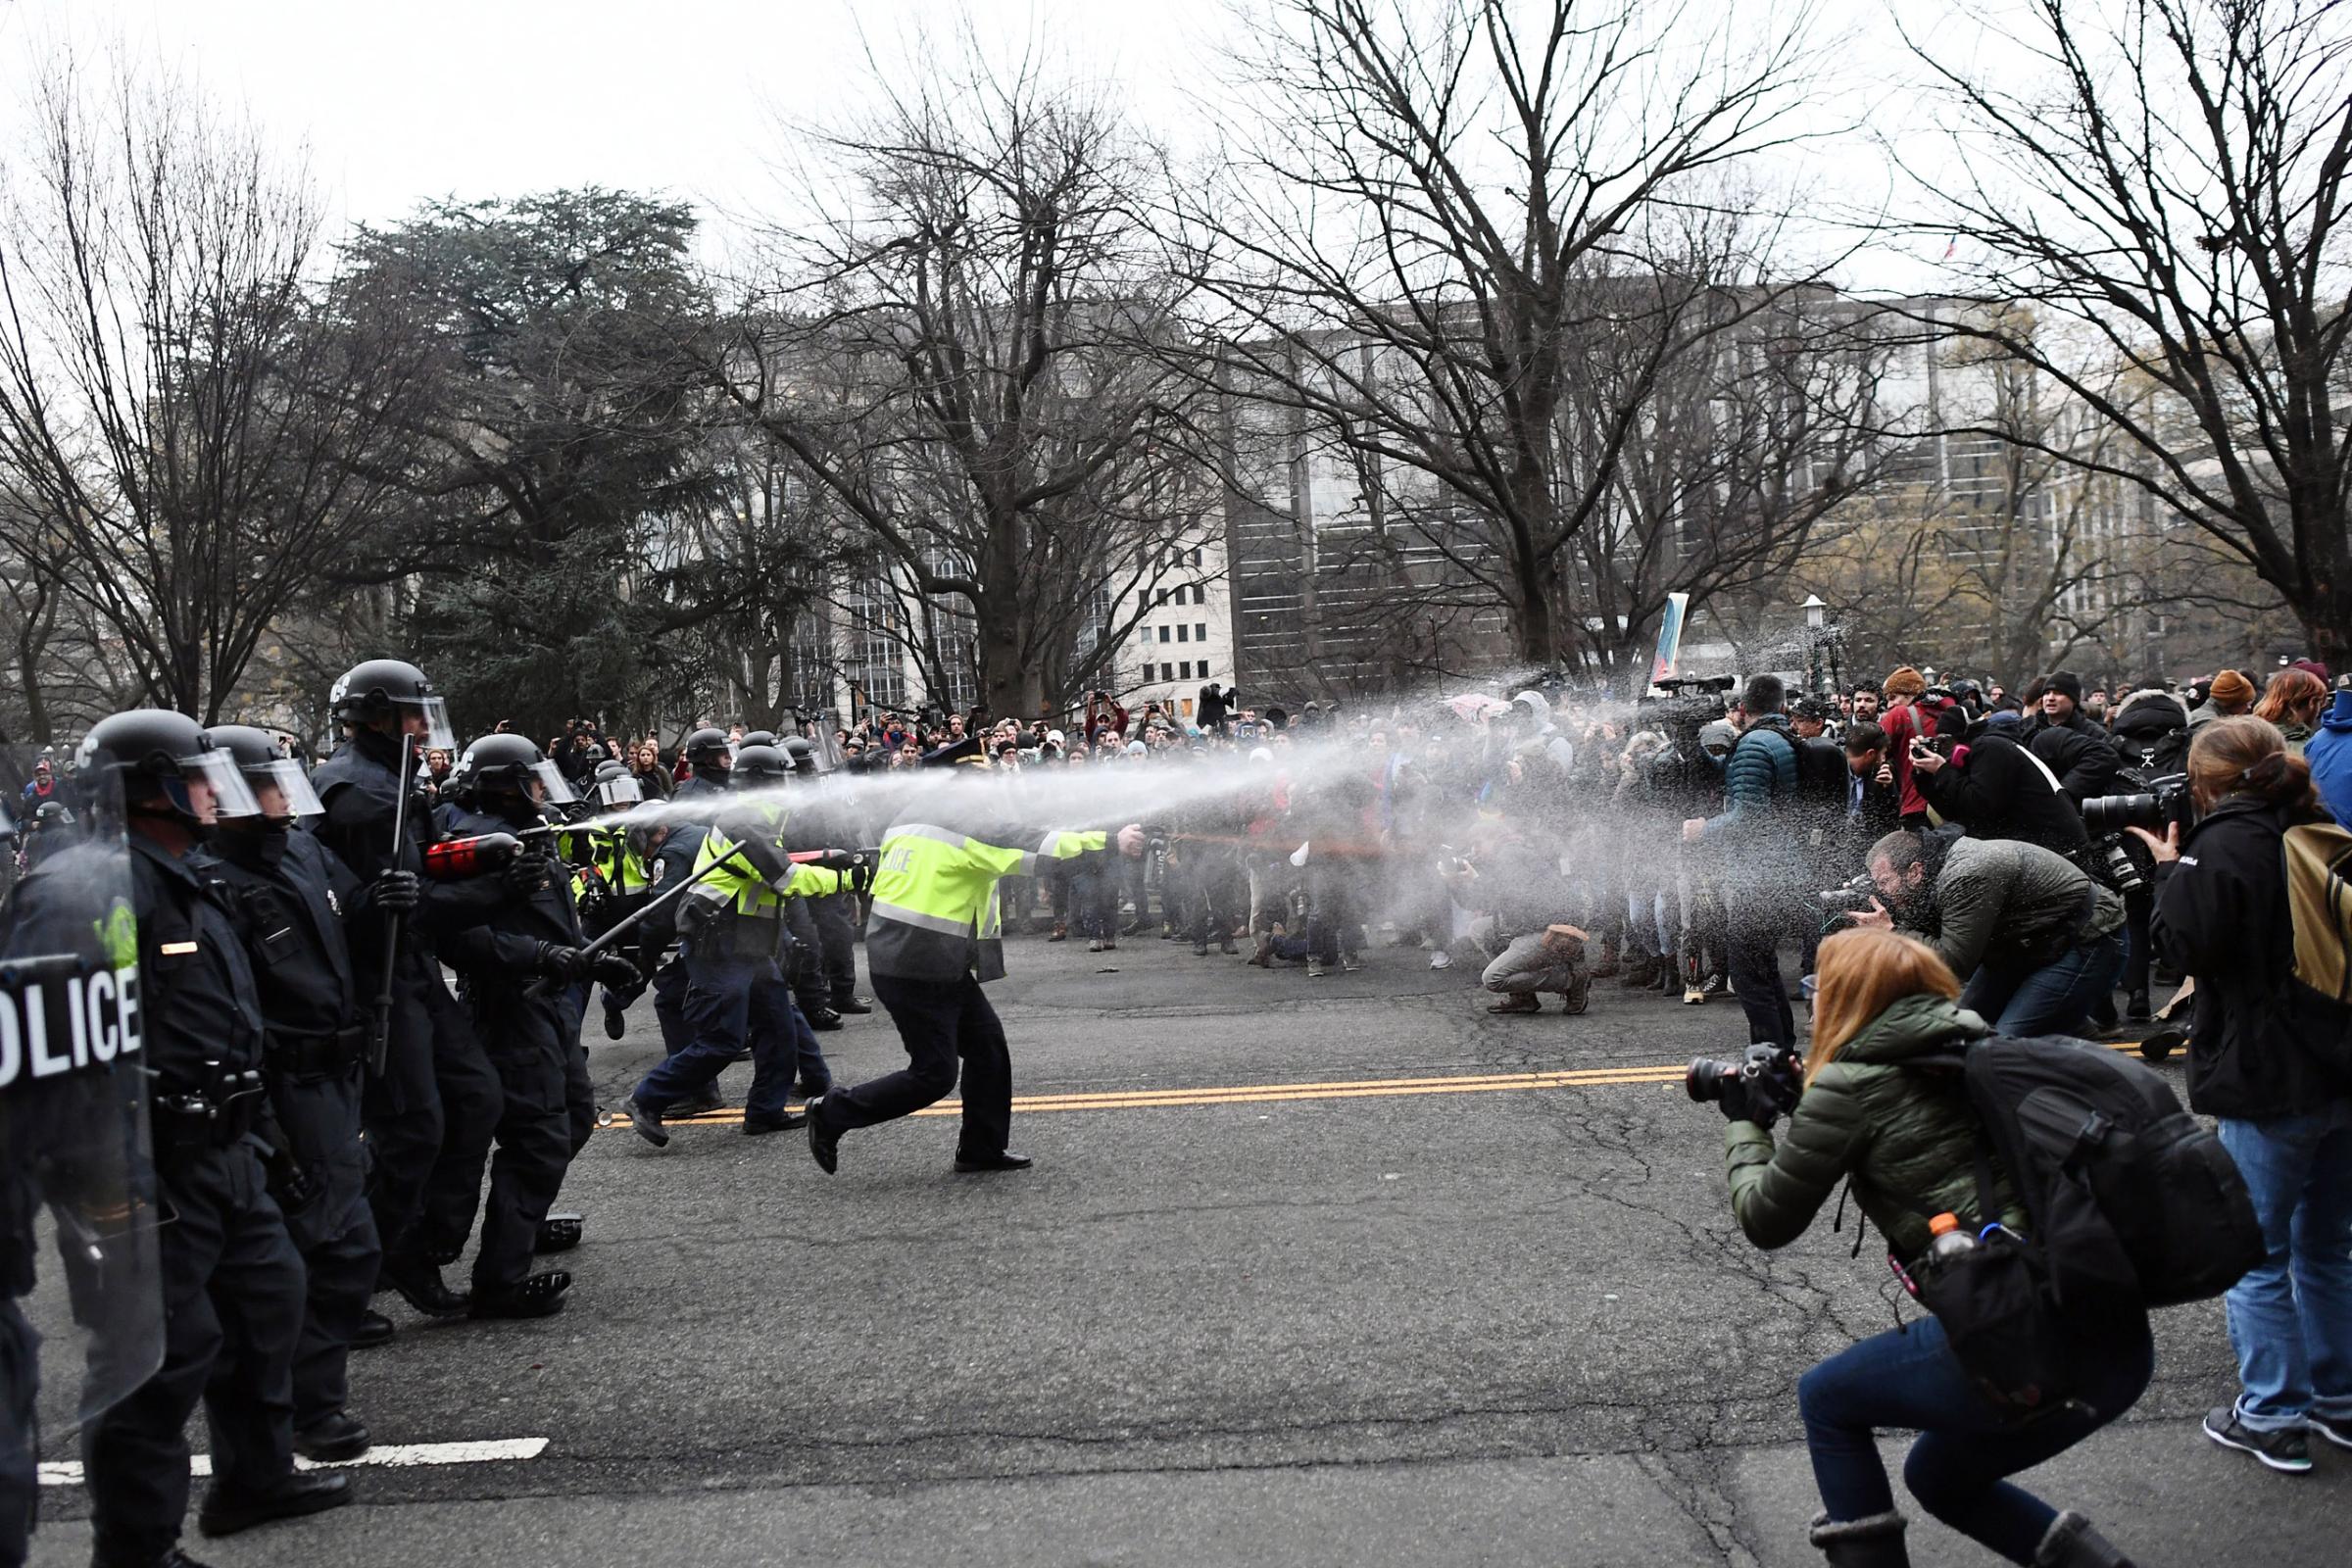 Police pepper spray at anti-Trump protesters during protests in Washington, DC, on Jan. 20, 2017. 